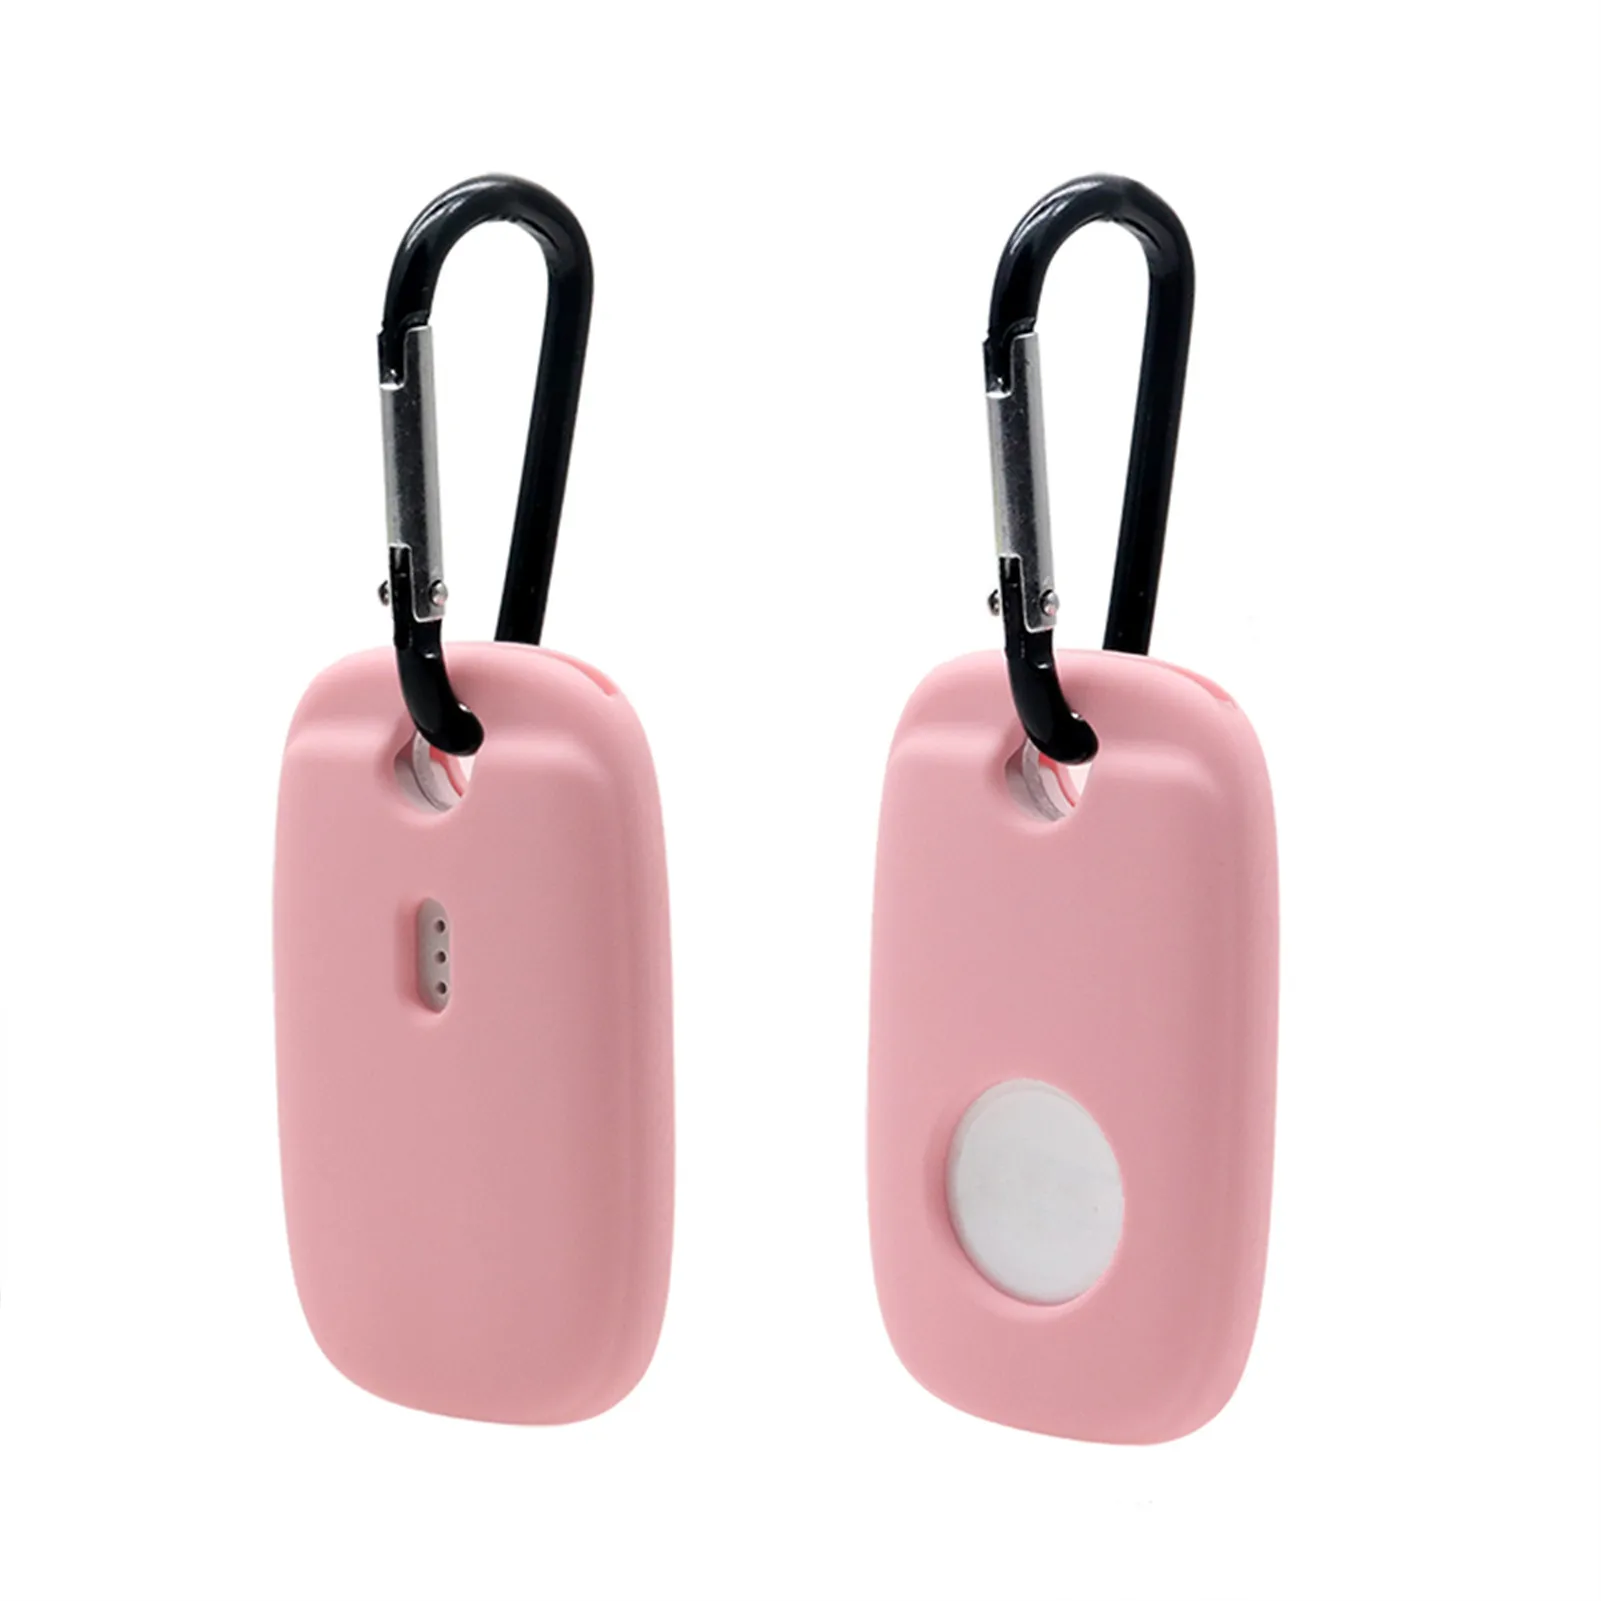 2PCS Tile Pro (2022) Smart Tracker Key Finder Case Storage Anti-Lost Blutooth Scratch Proof Silicone Case Key Finder Protective 